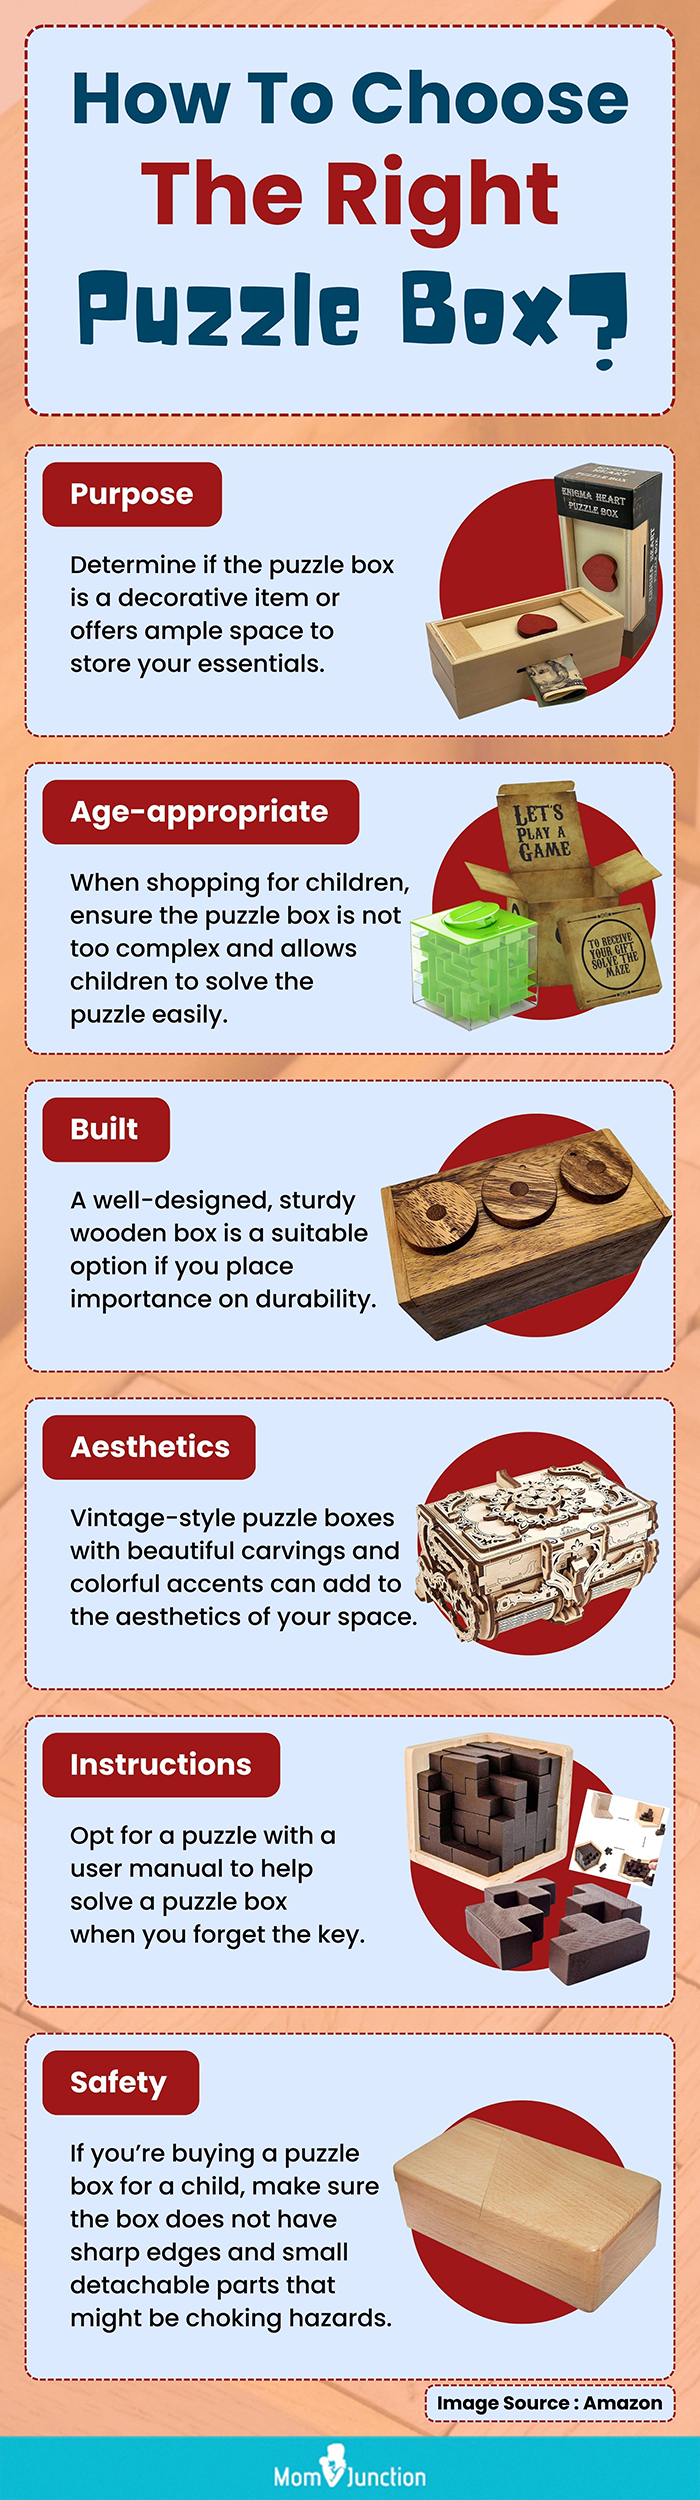 How To Choose The Right Puzzle Box (infographic)